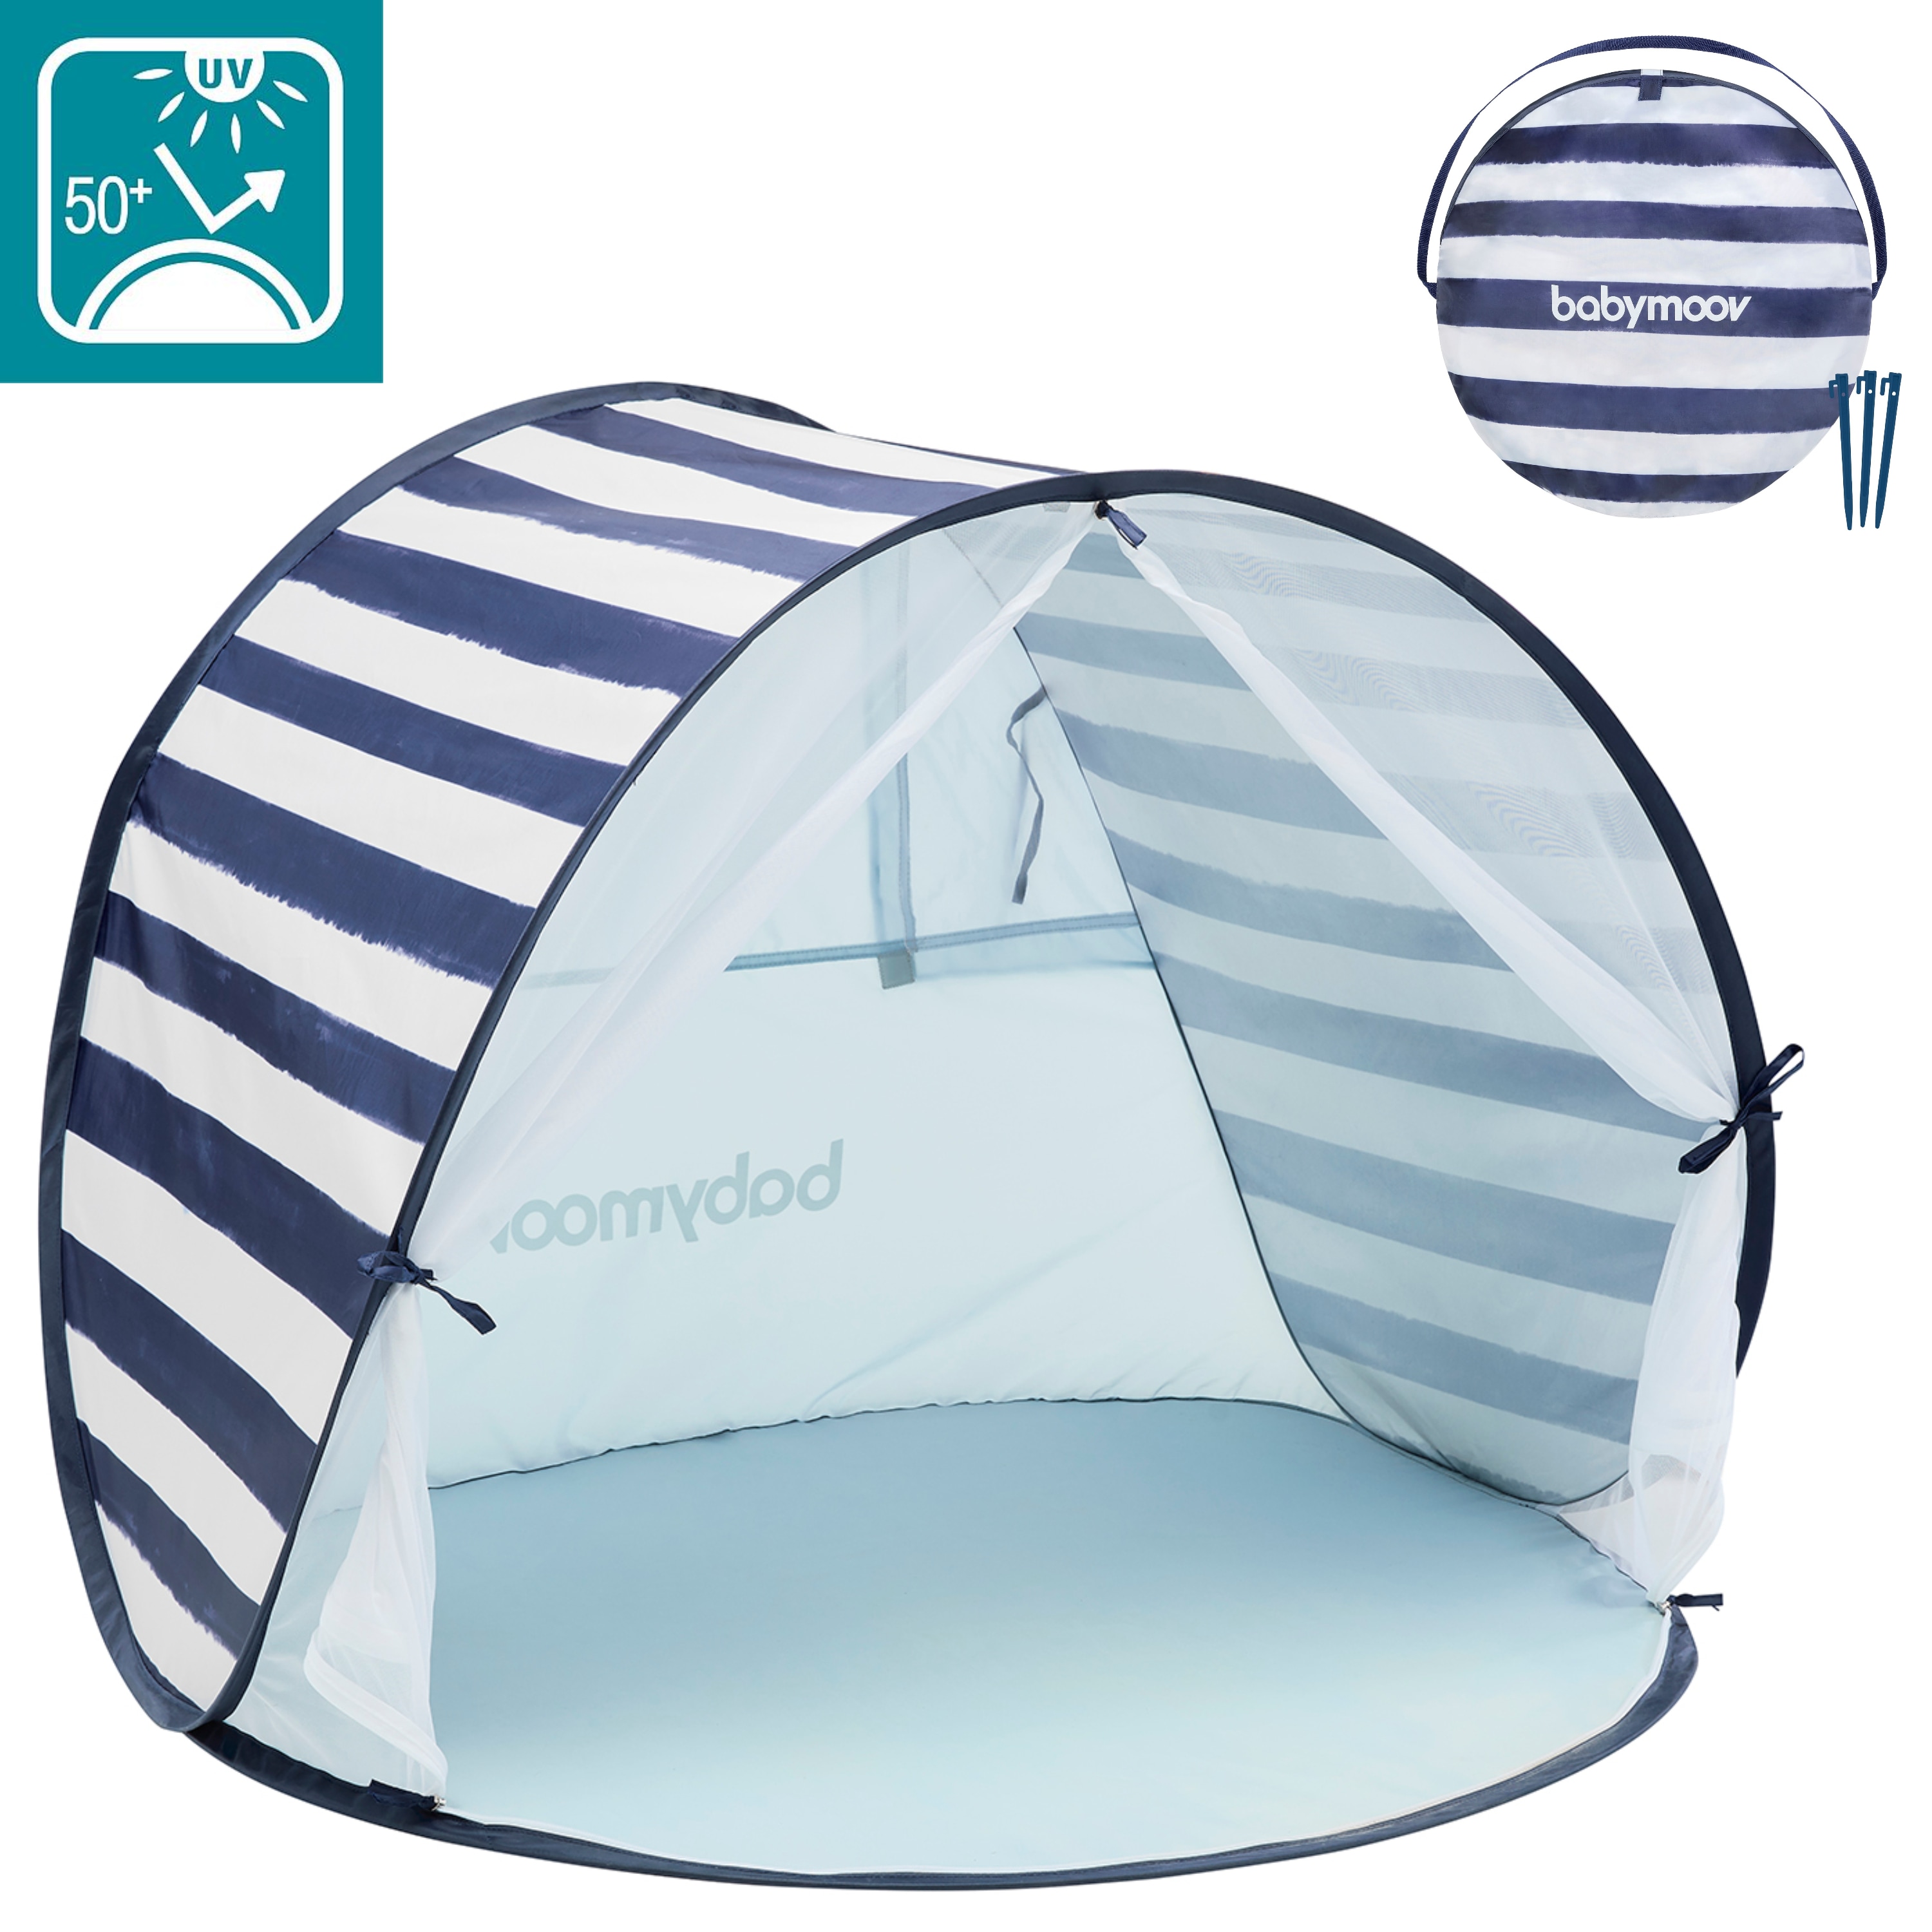 Babymoov Kid's UV Resistant Portable Pop Up Sun Shelter and Marine Play Tent - Gray, Easy-to-Use Pop-Up Design, UV-Resistant Canopy Polyester -  233597